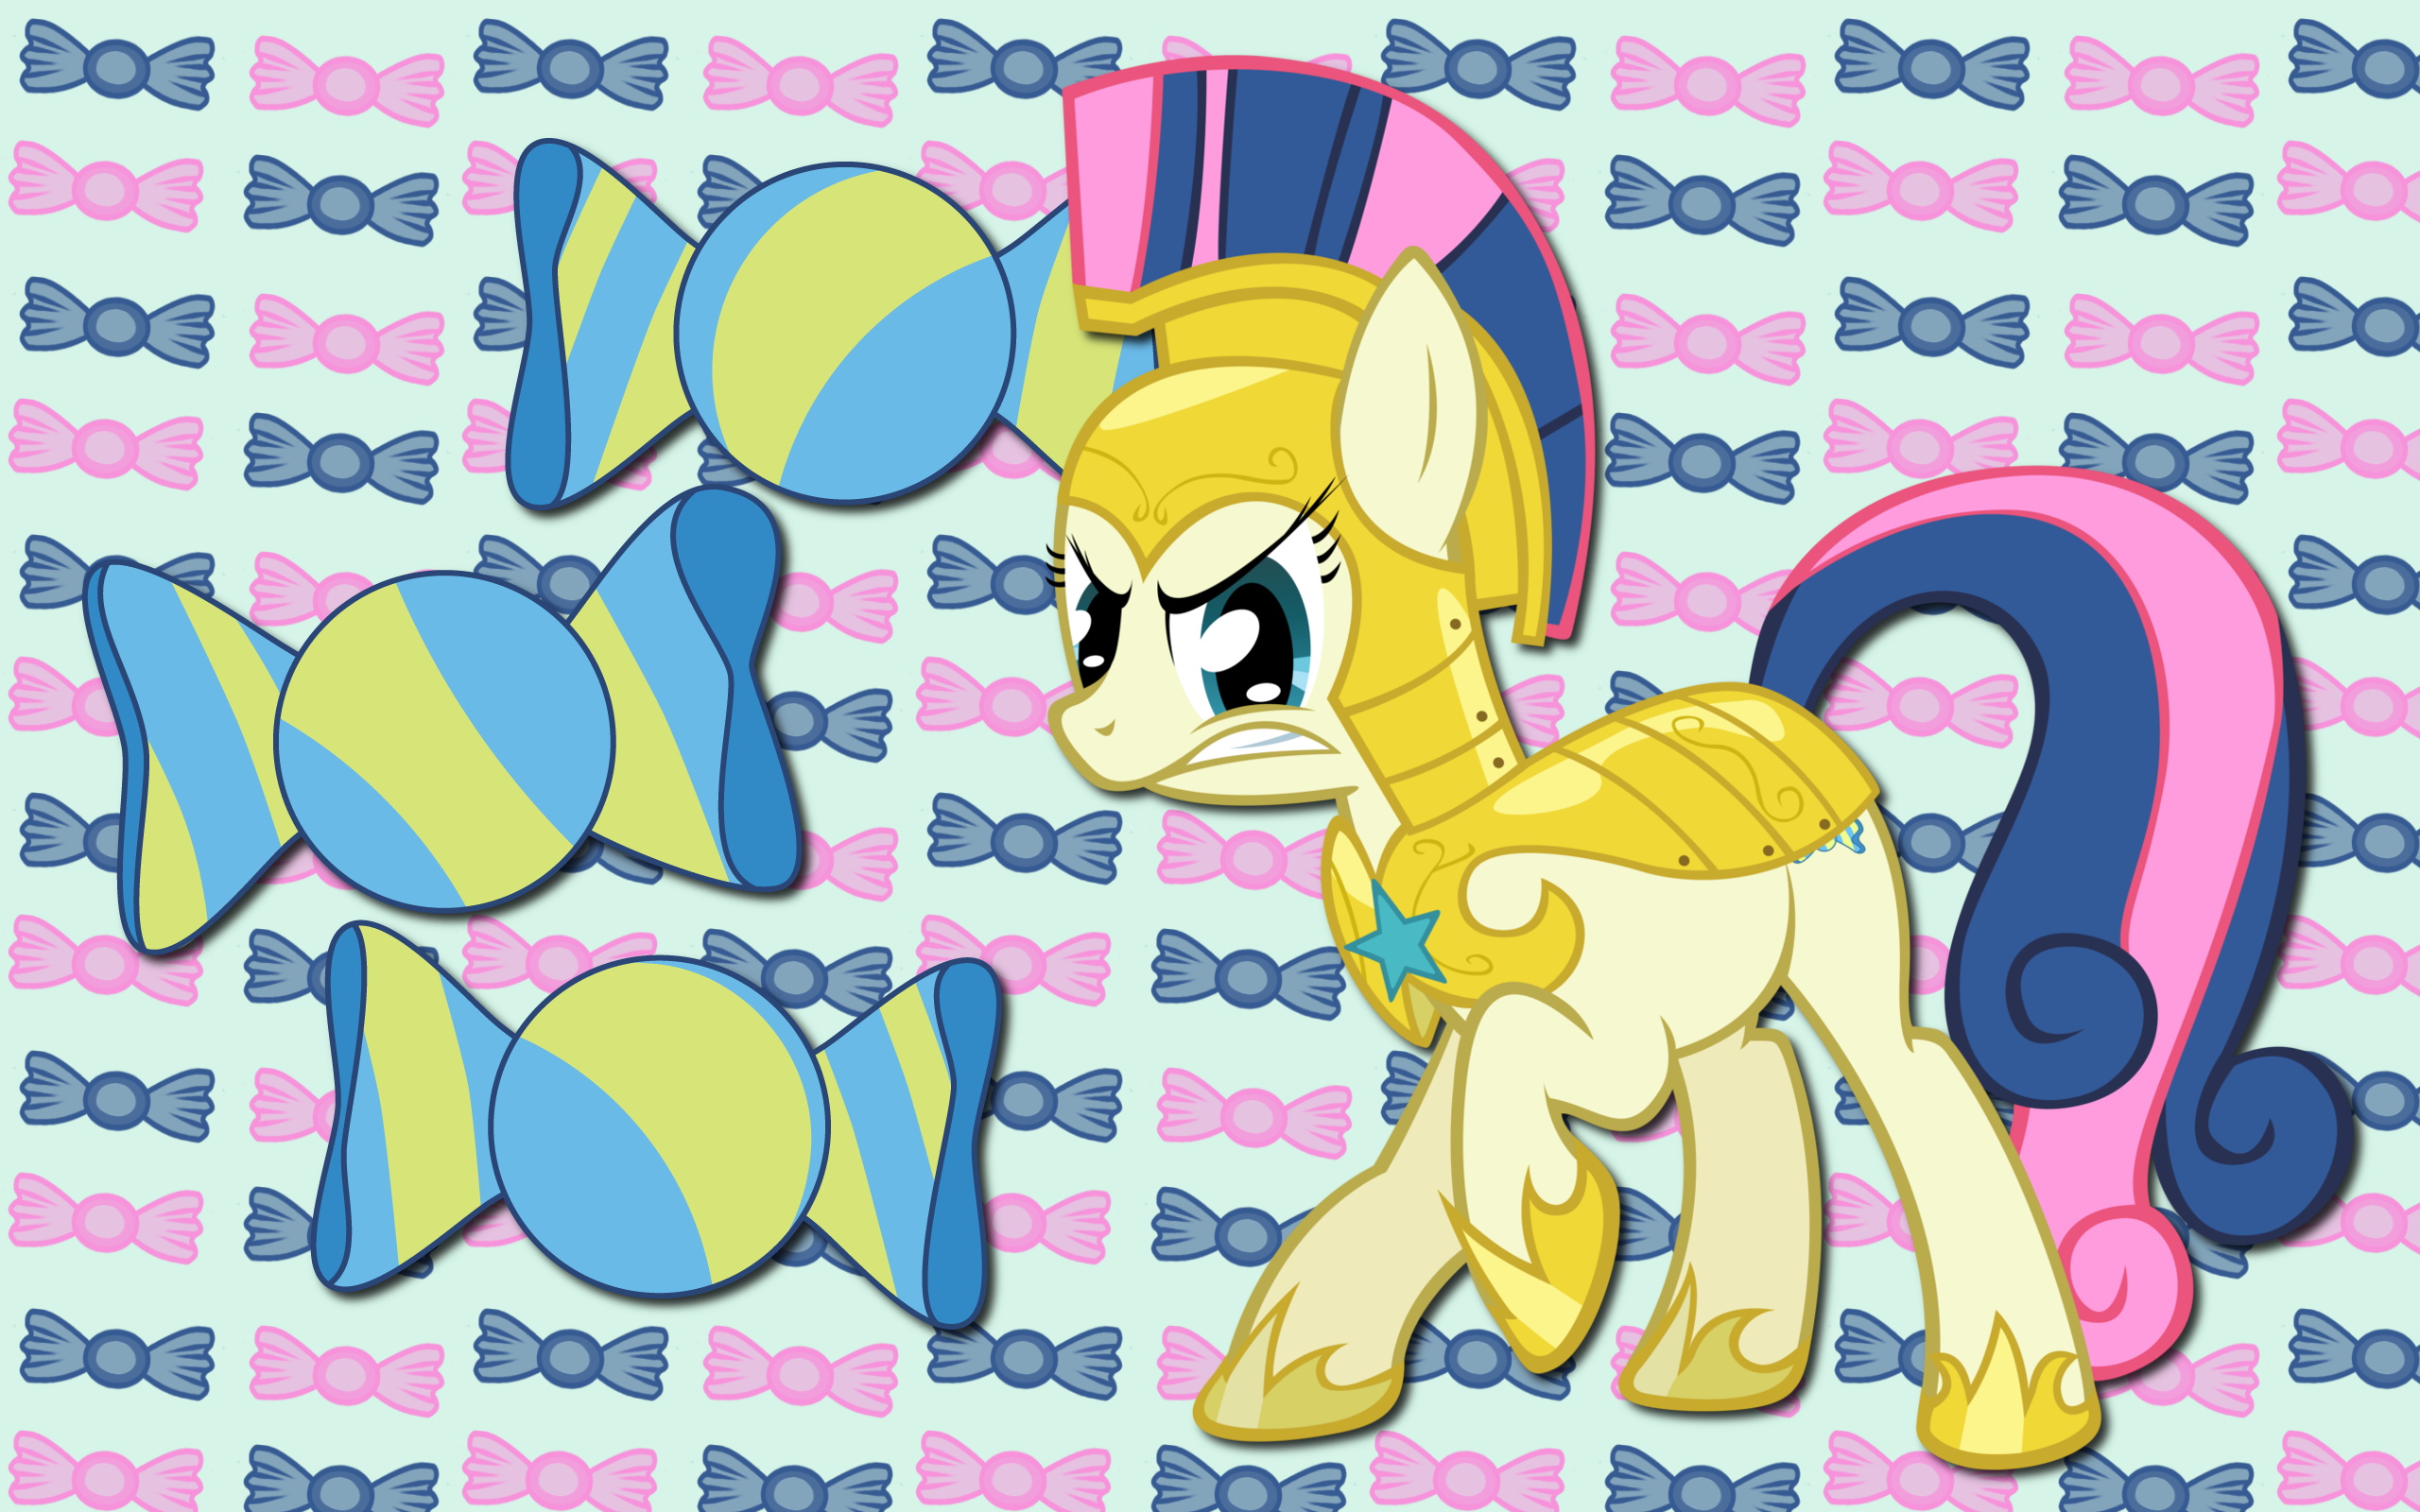 Guard Bon Bon WP by AliceHumanSacrifice0, ooklah and Spaceponies